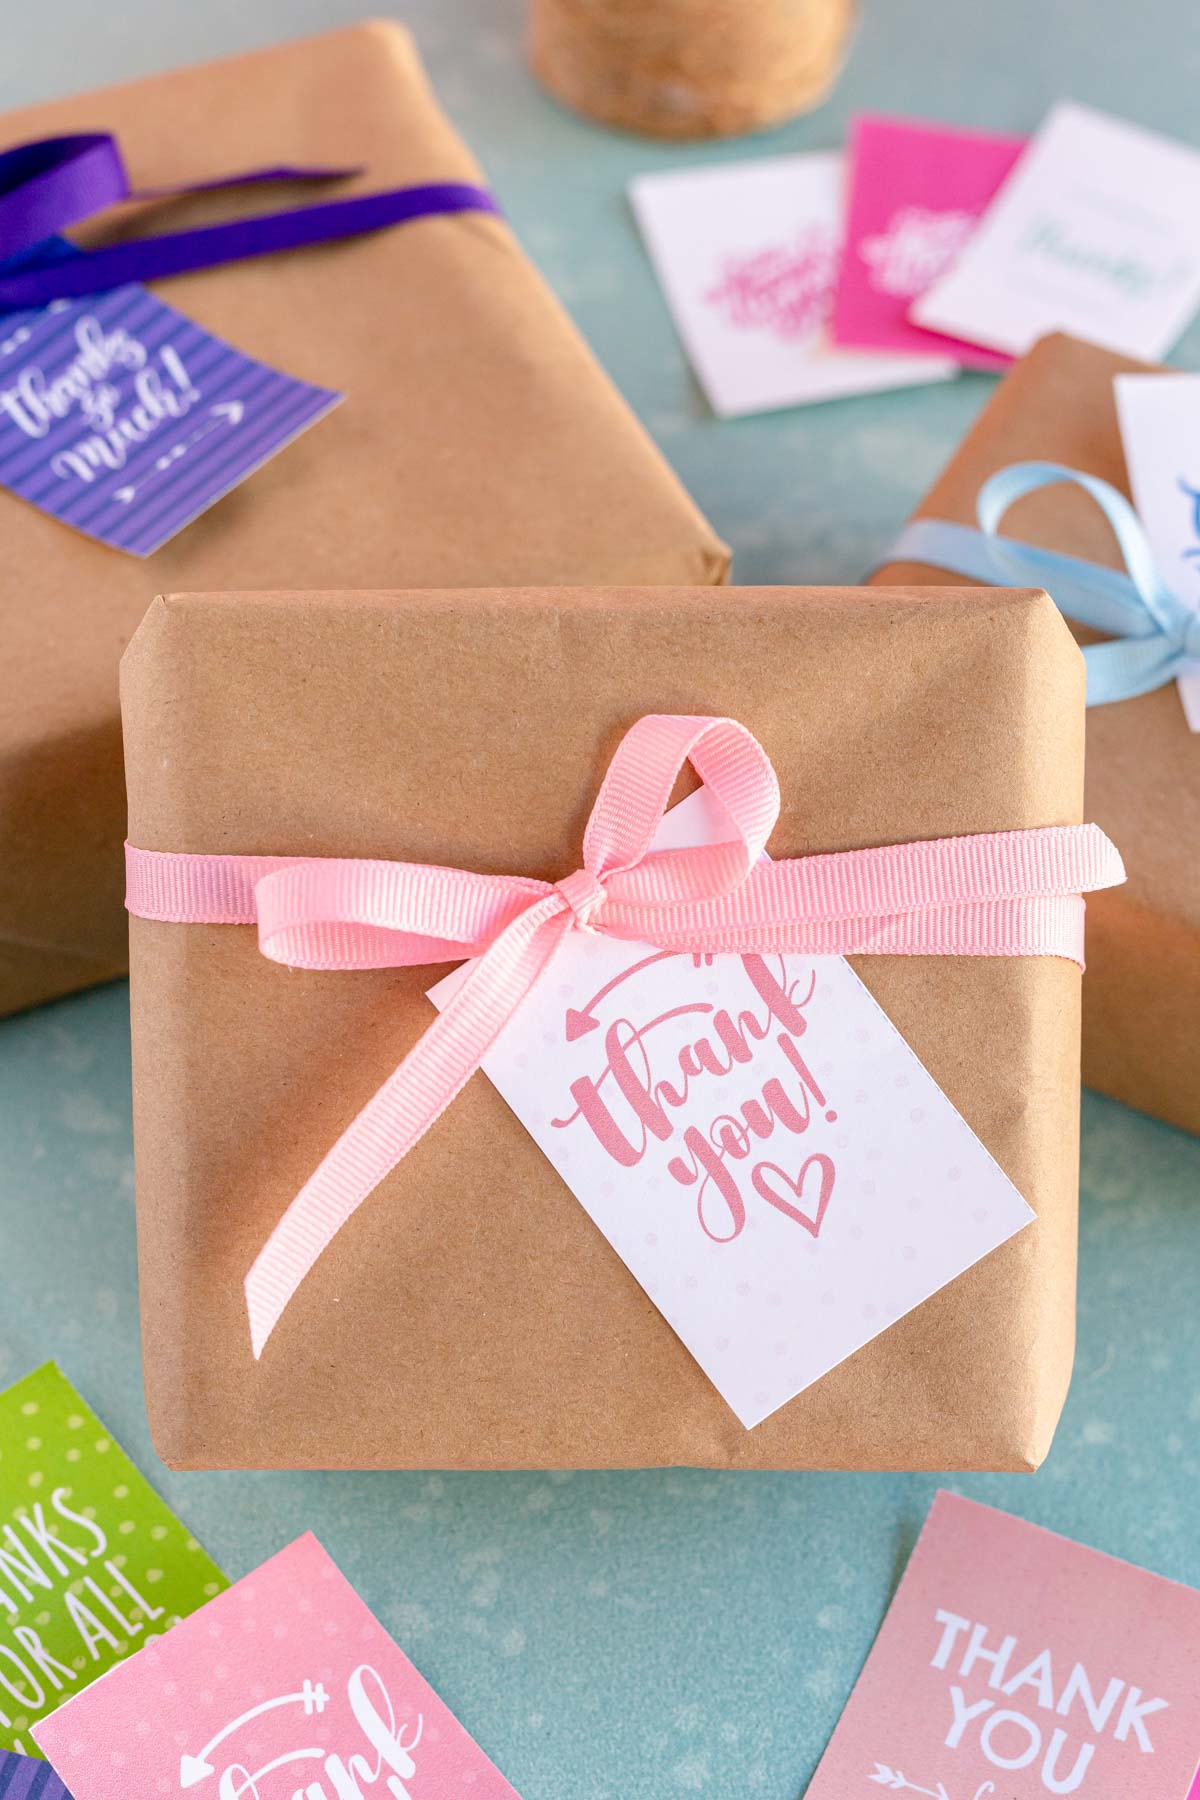 box wrapped in brown paper with a thank you tag